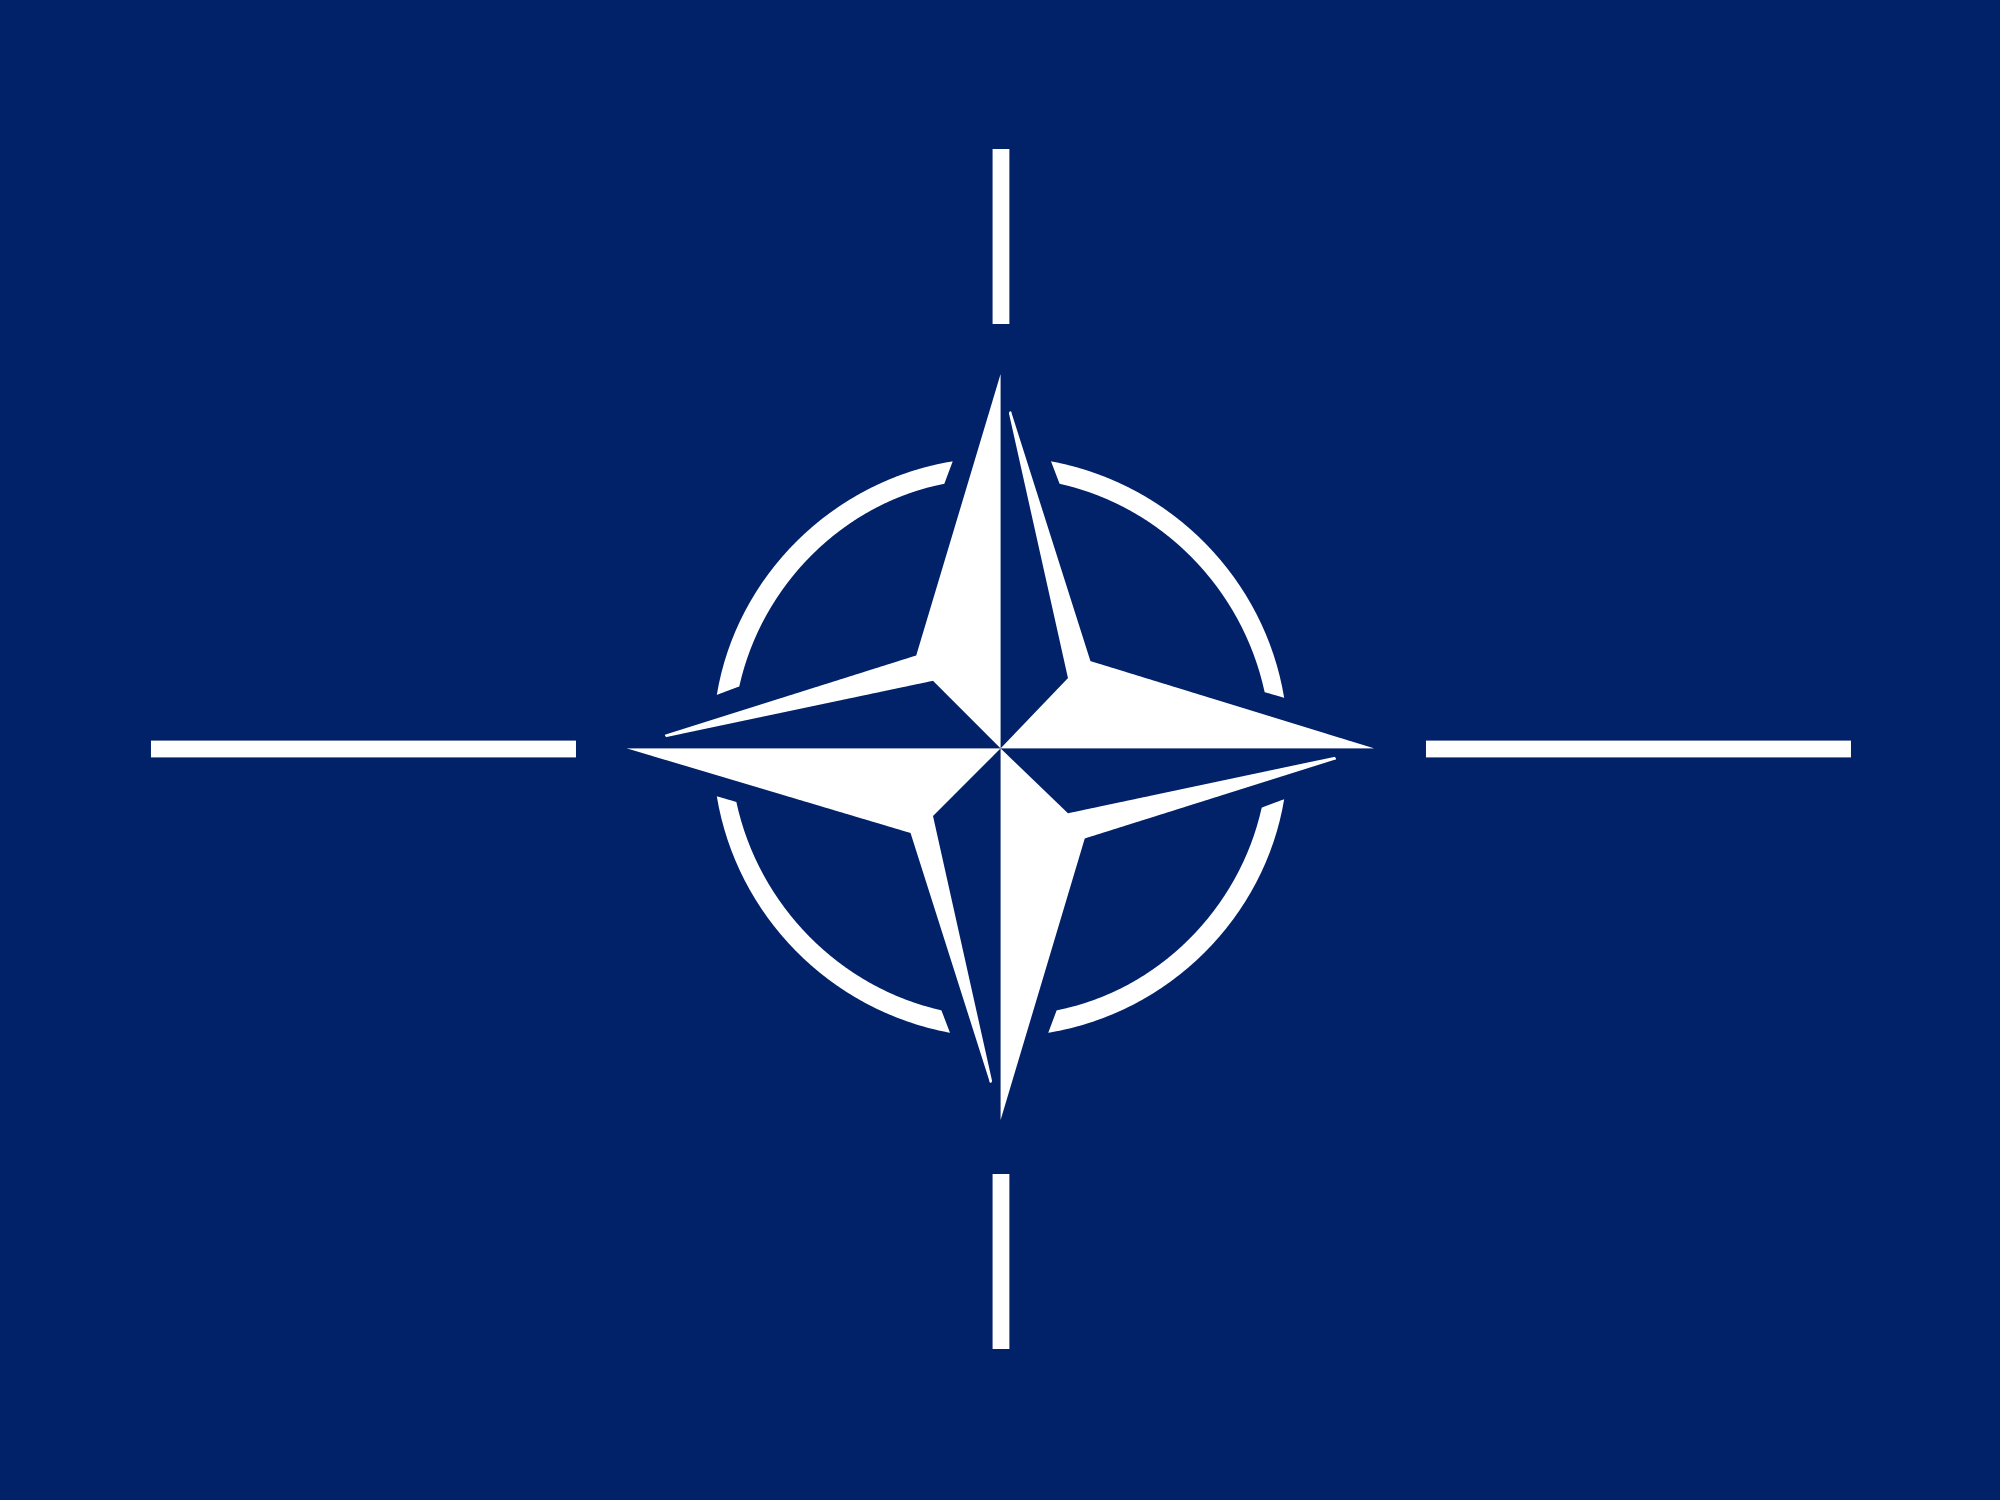 Nato needs to reform into a global alliance against Islamic terrorism - or become obsolete